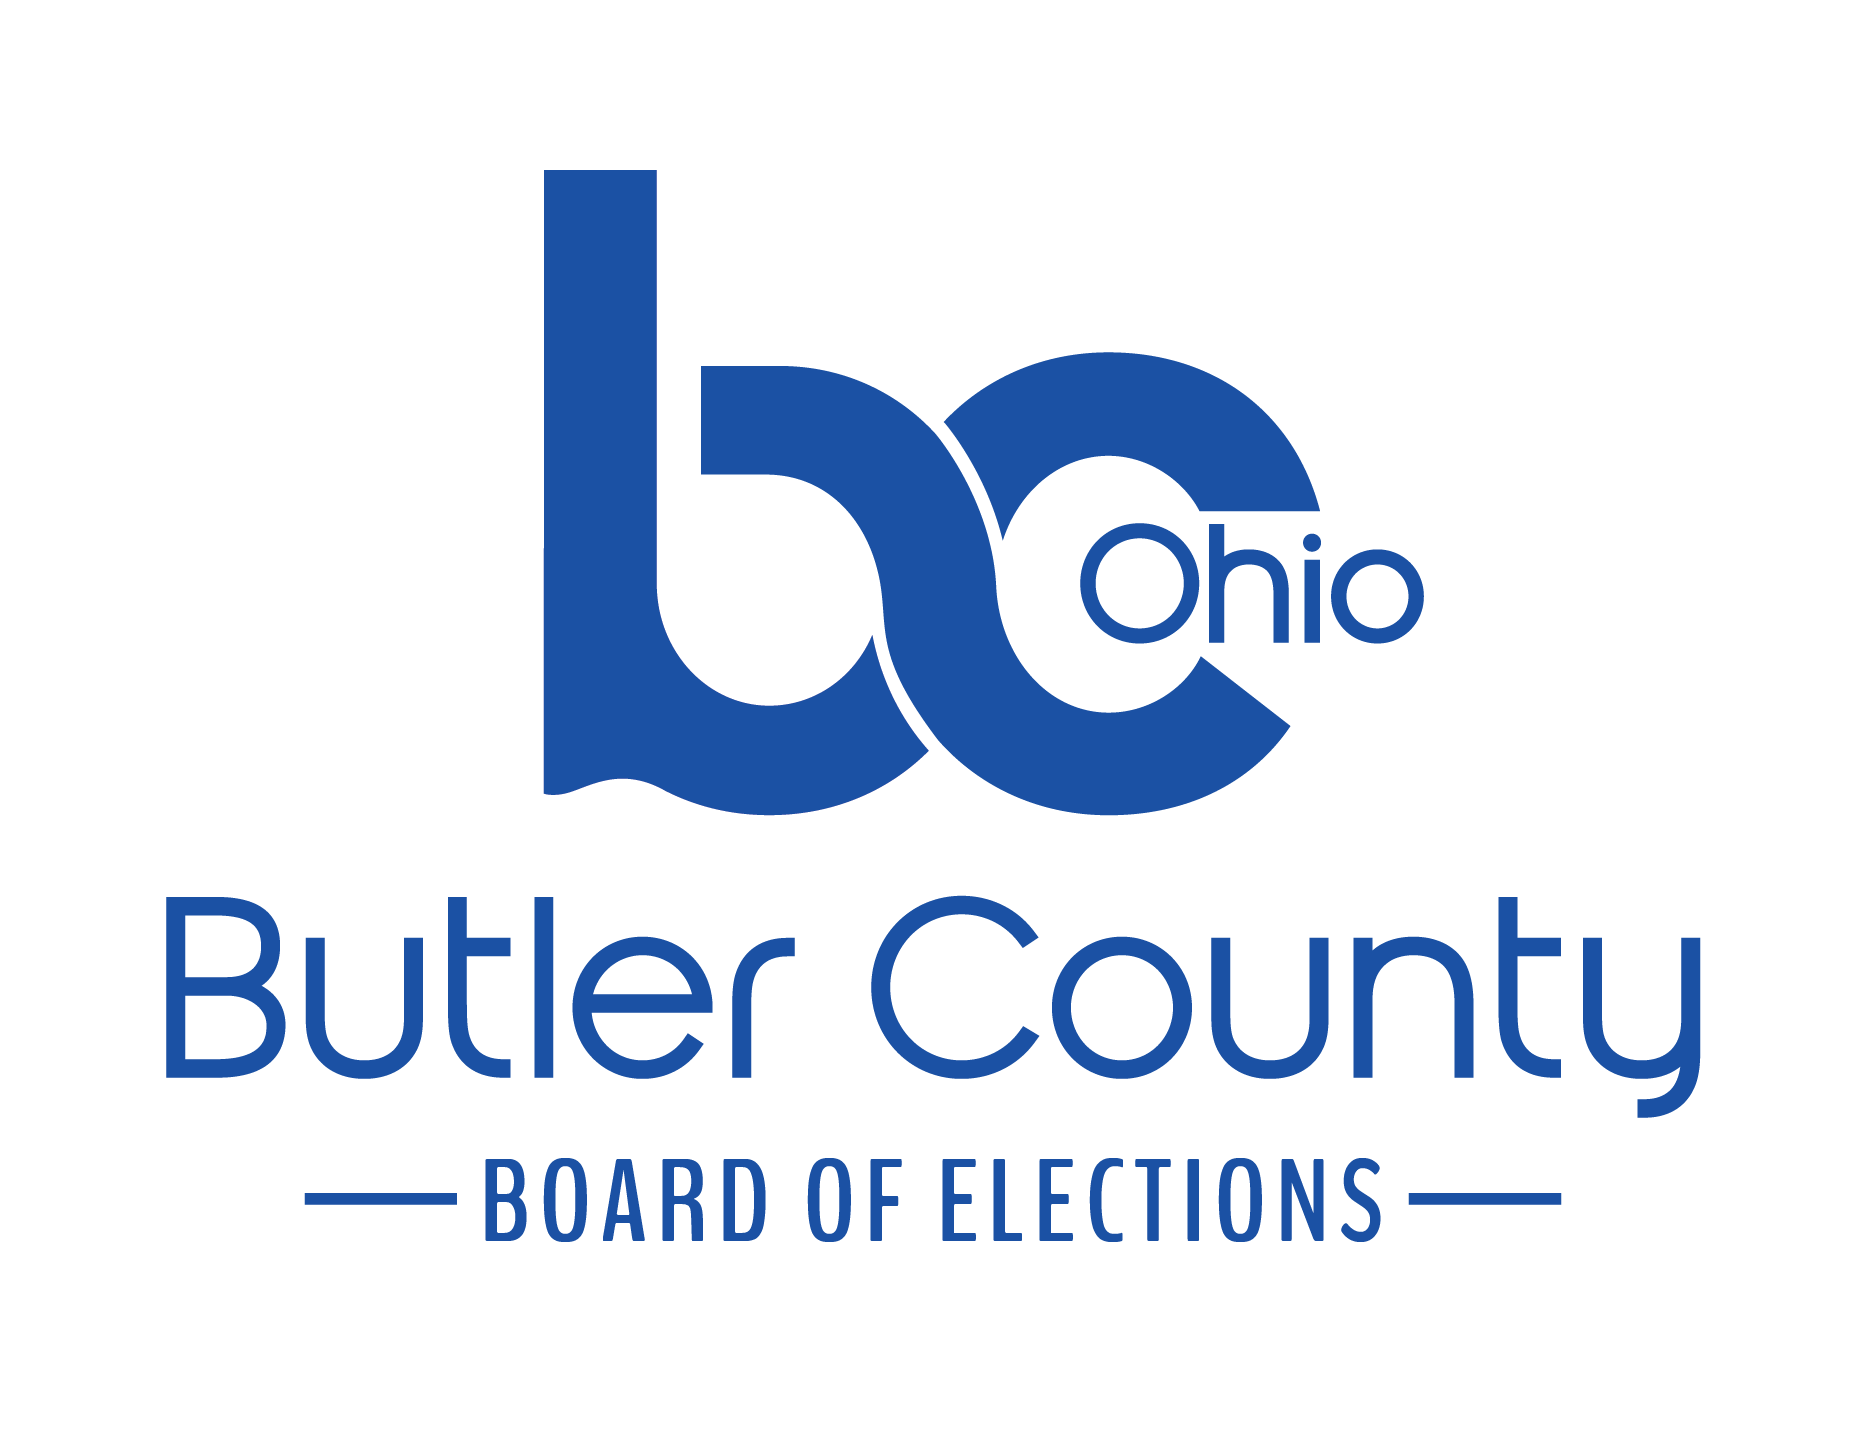 Butler County Board of Elections website